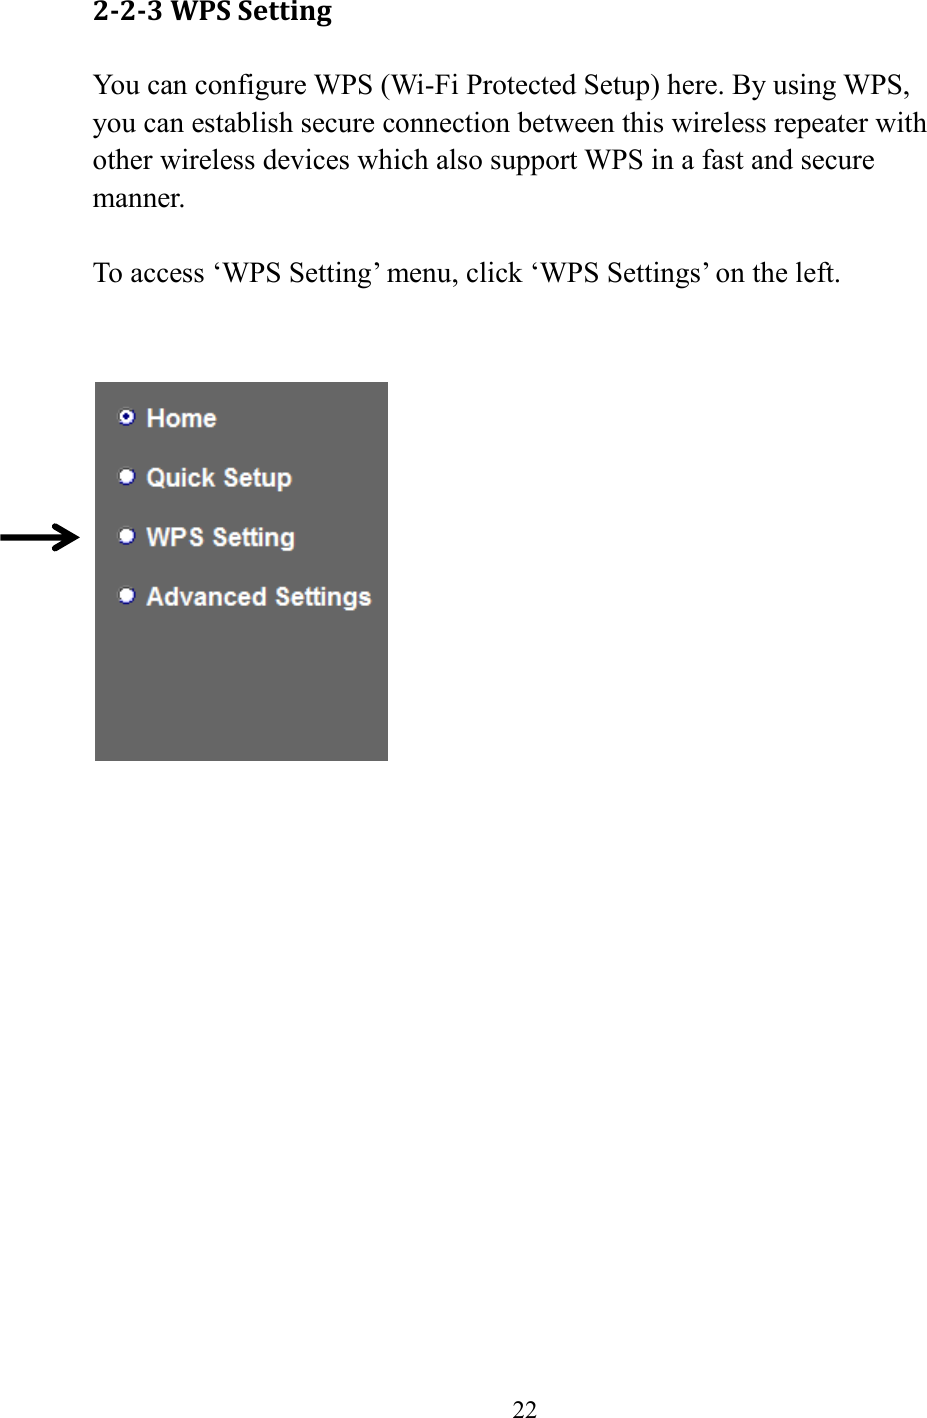  22  2-2-3 WPS Setting You can configure WPS (Wi-Fi Protected Setup) here. By using WPS, you can establish secure connection between this wireless repeater with other wireless devices which also support WPS in a fast and secure manner.  To access ‘WPS Setting’ menu, click ‘WPS Settings’ on the left.       